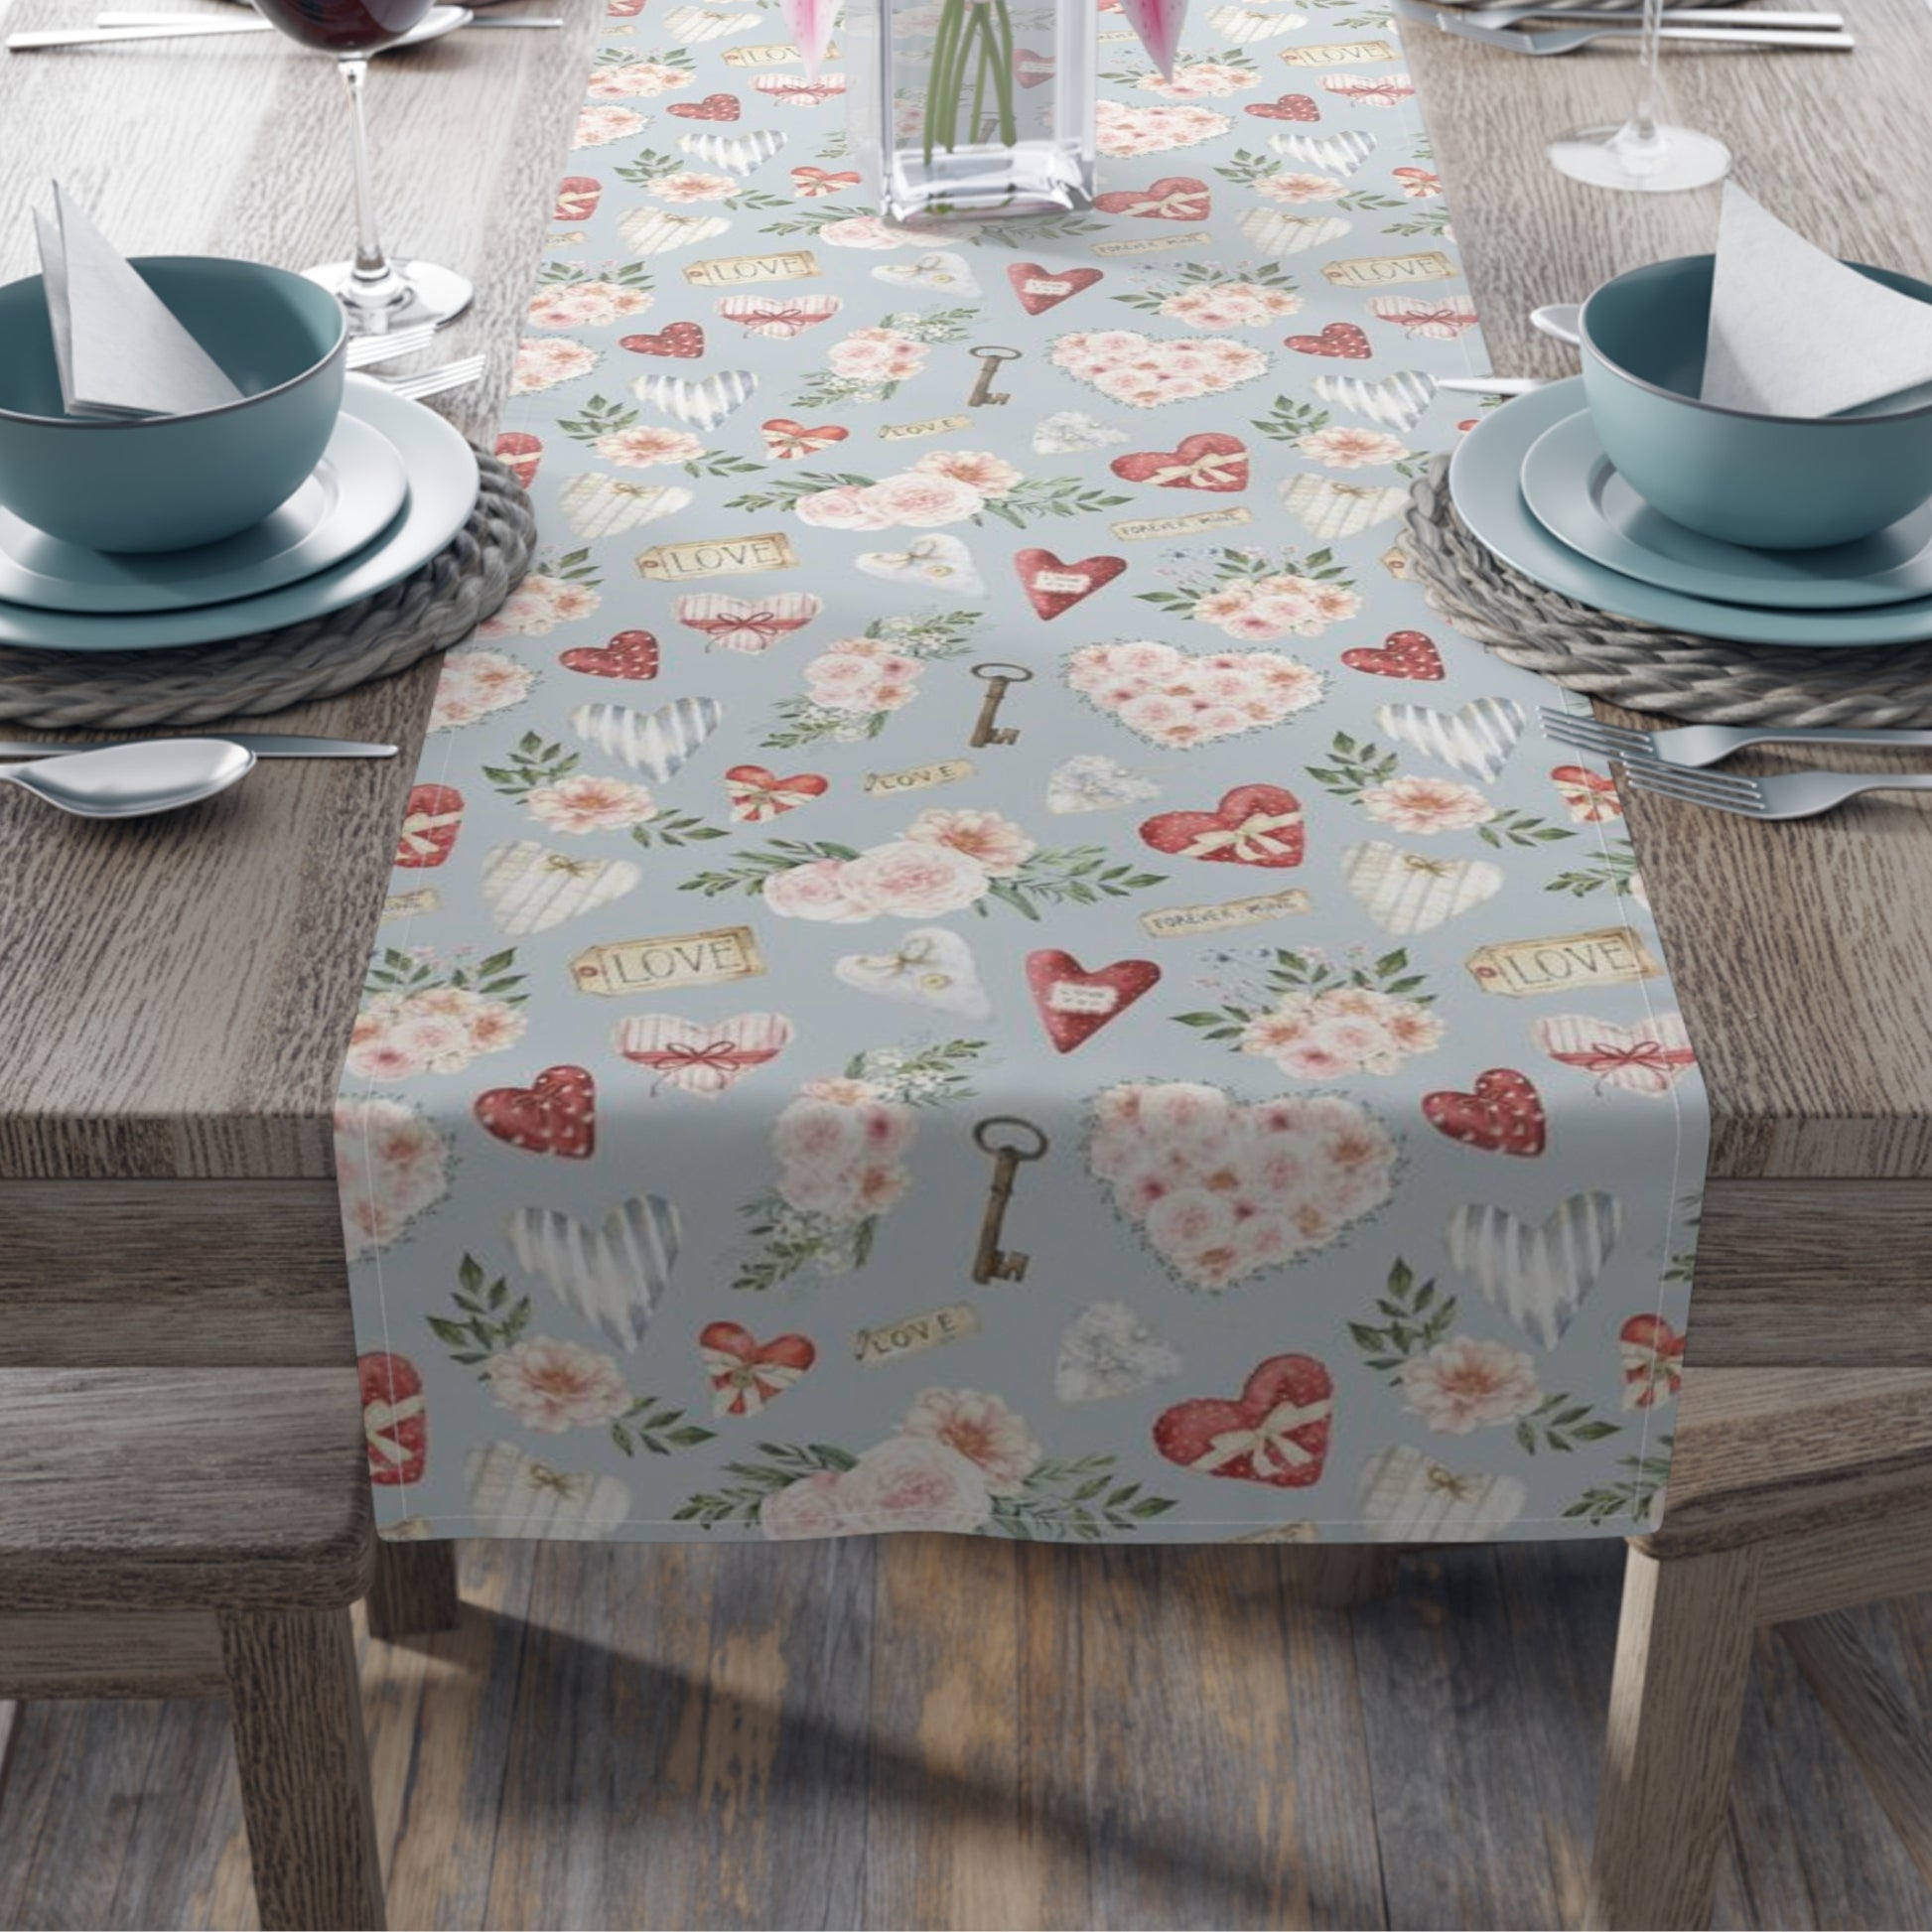 a table with a table runner and place settings